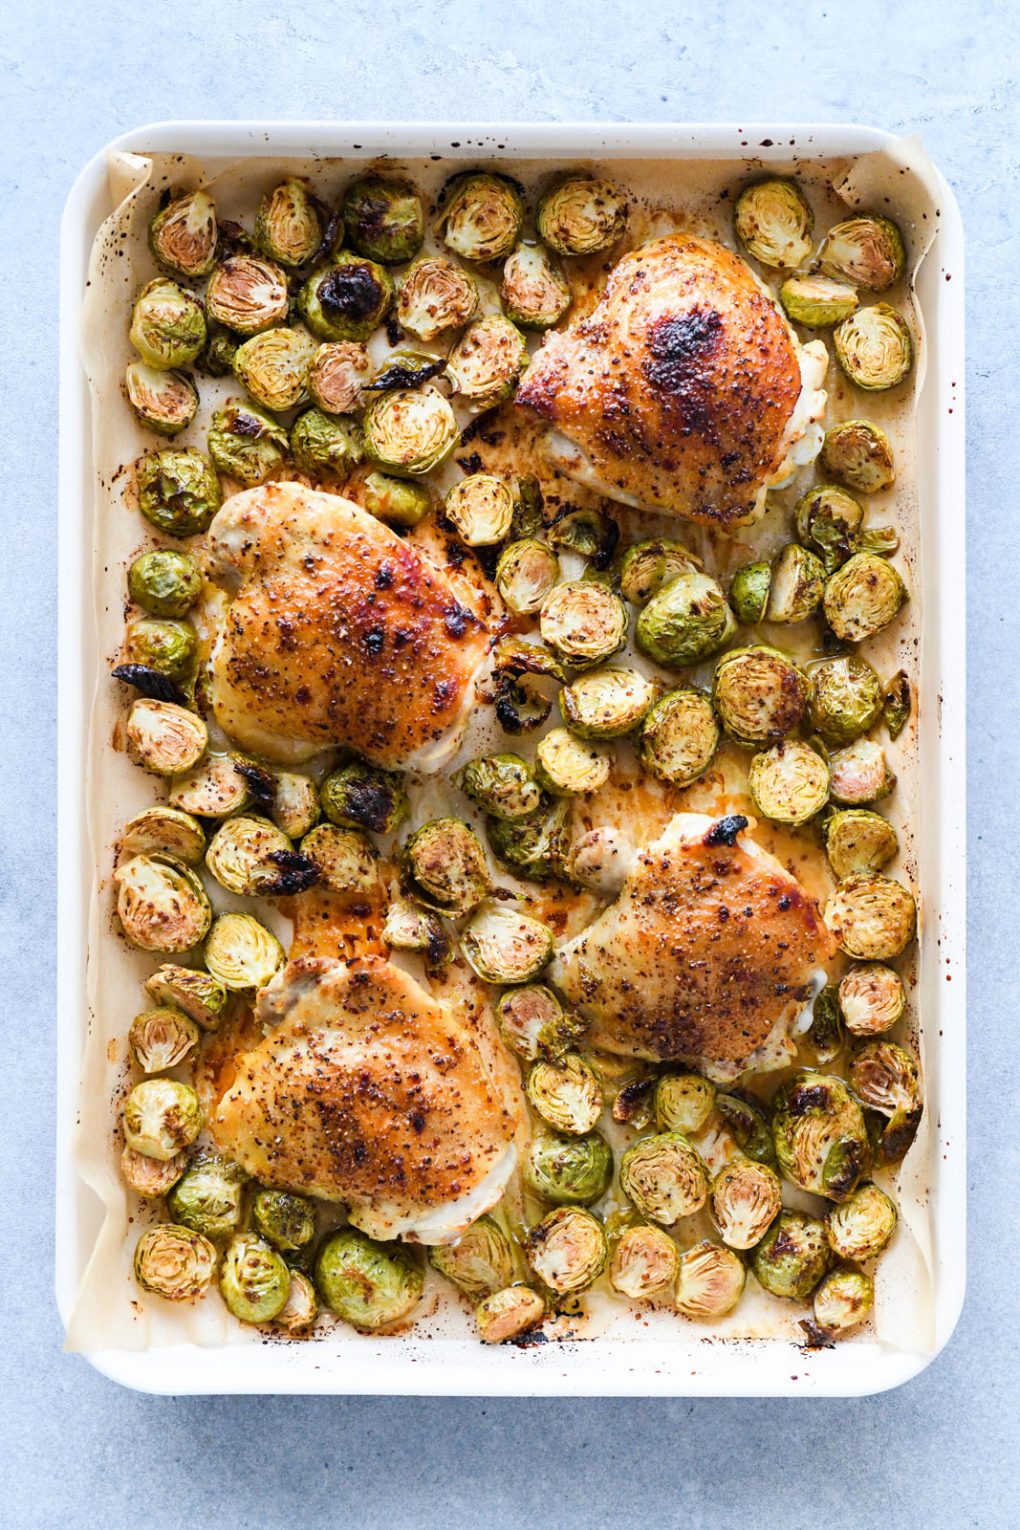 Overhead view of a sheet pan with four golden brown honey mustard glazed chicken thighs, surrounded by crispy roasted brussels sprouts